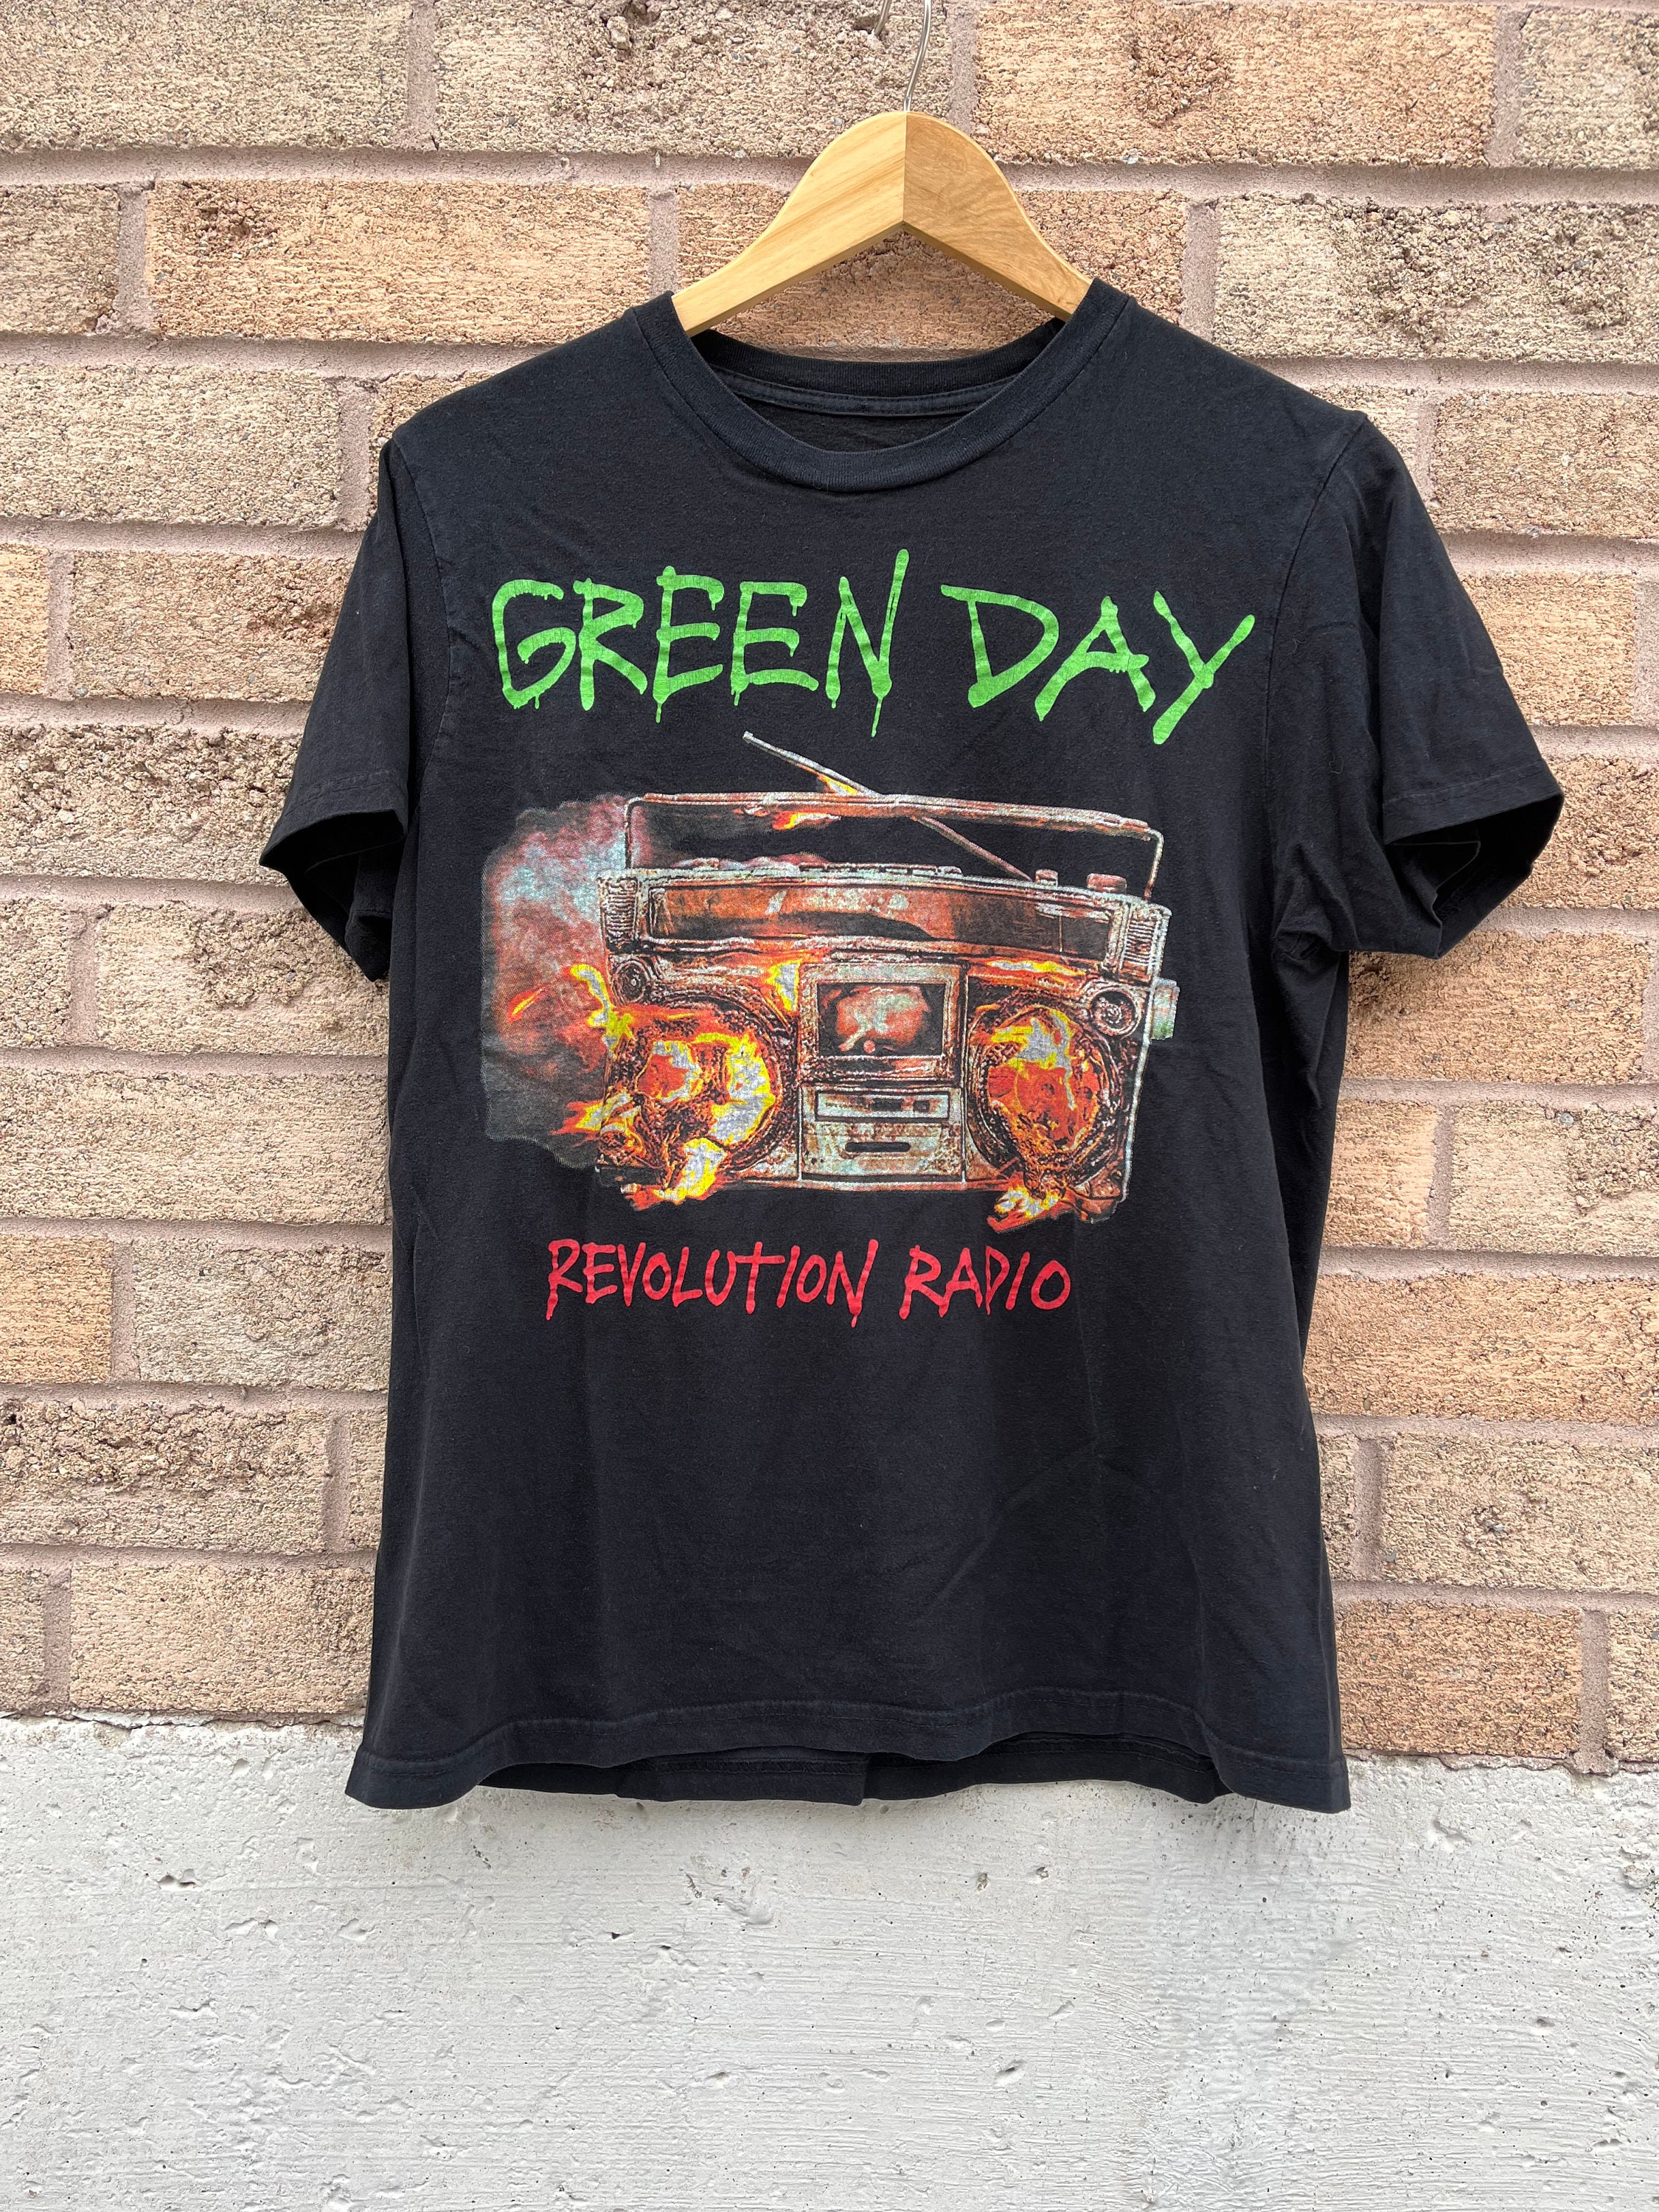 Green Day T Shirt Drips Official Black Mens Unisex Tee Classic Punk Rock New